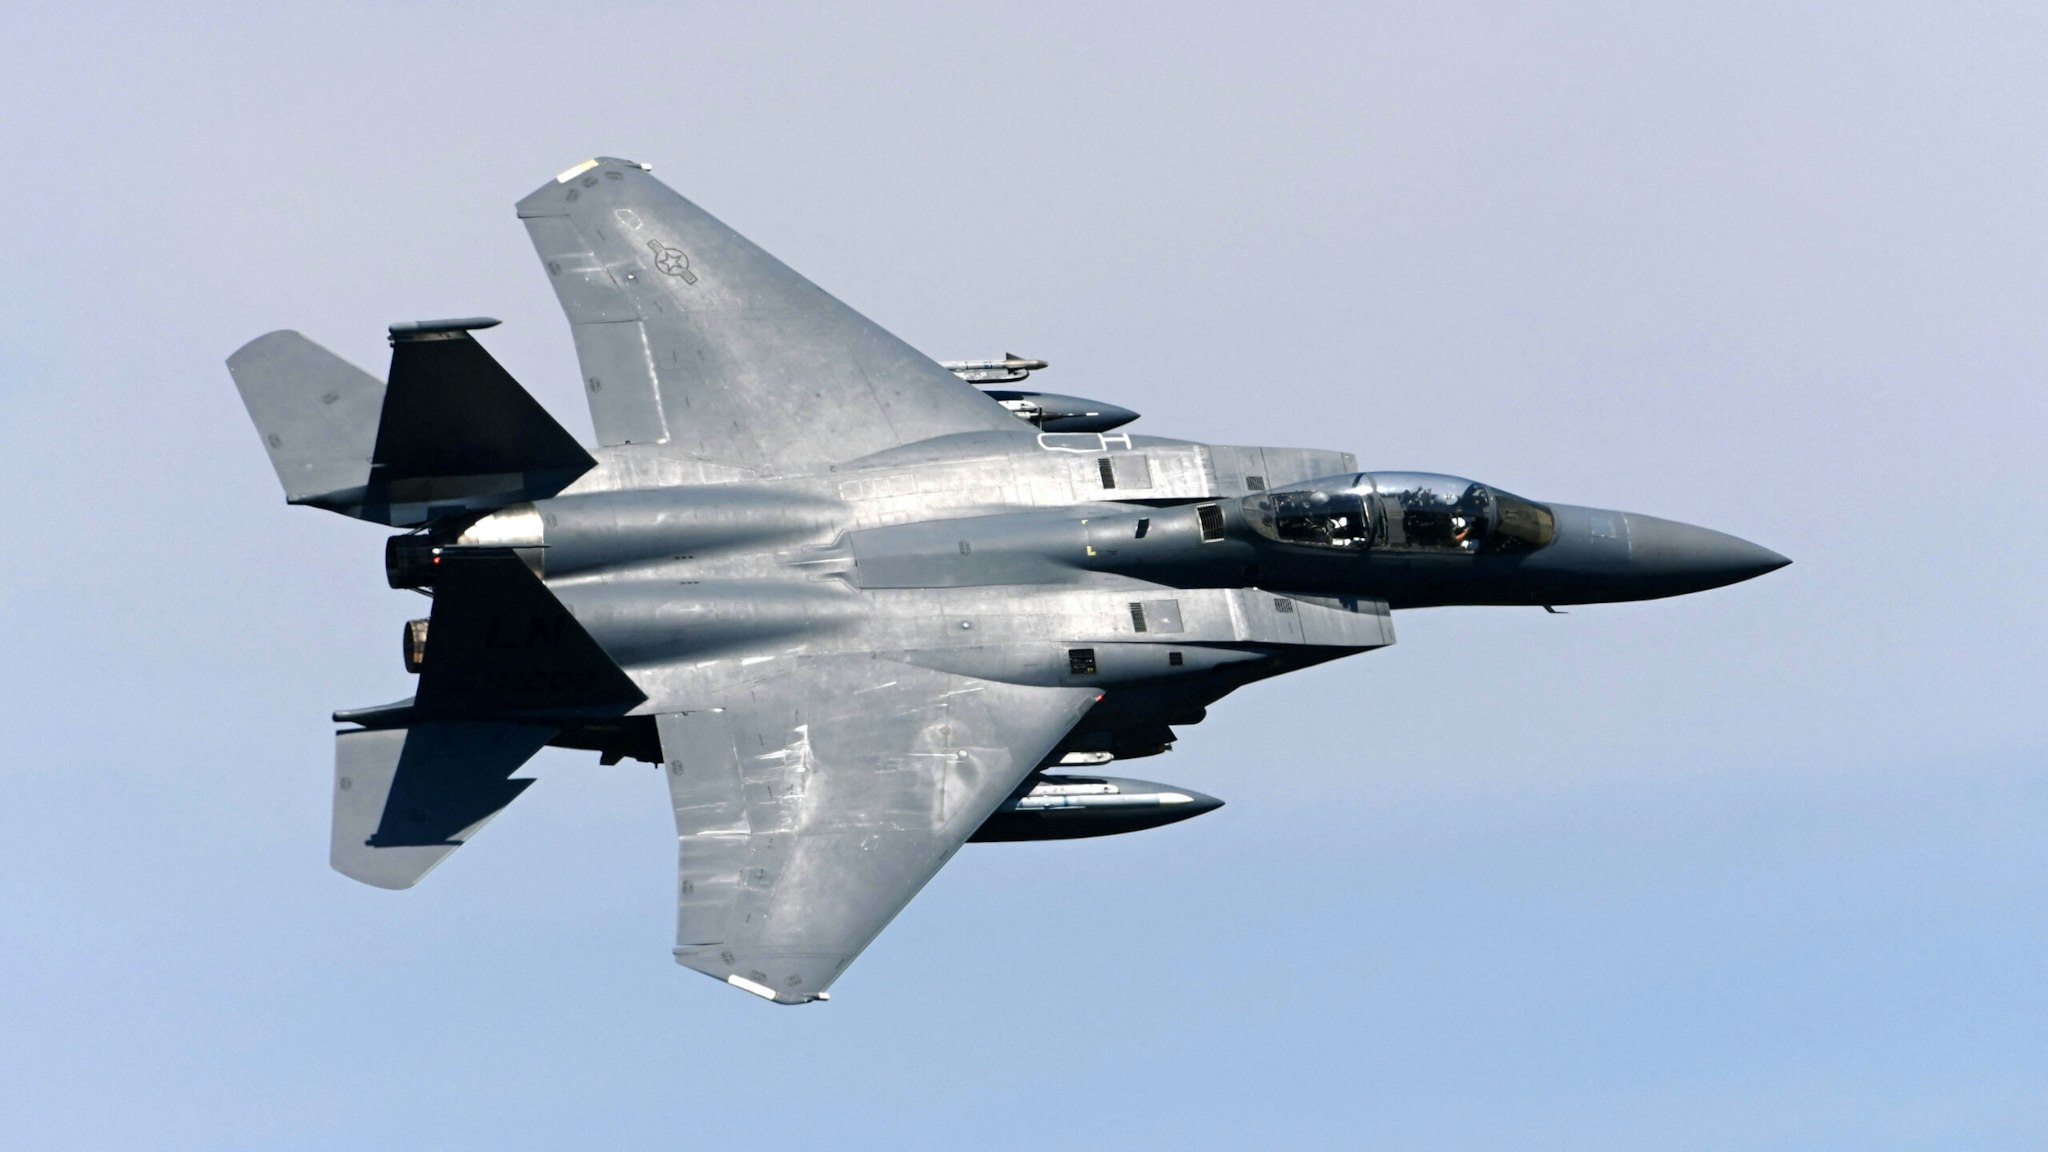 An F15 jet of the US Air Force flies during the 'Dynamic Front 22', the US Army led NATO and Partner integrated annual artillery exercise in Europe, in Grafenwoehr, near Eschenbach, southern Germany, on July 20, 2022. - The 'Dynamic Front 22' exercise, led by 56th Artillery Command, is the premier US led NATO and Partner integrated artillery exercise in Europe and includes more than 3000 participants from 19 nations. Allied artillery and supporting units practice integrating joint fires and test interoperability in a multi-national enviroment until 24 July, 2022.